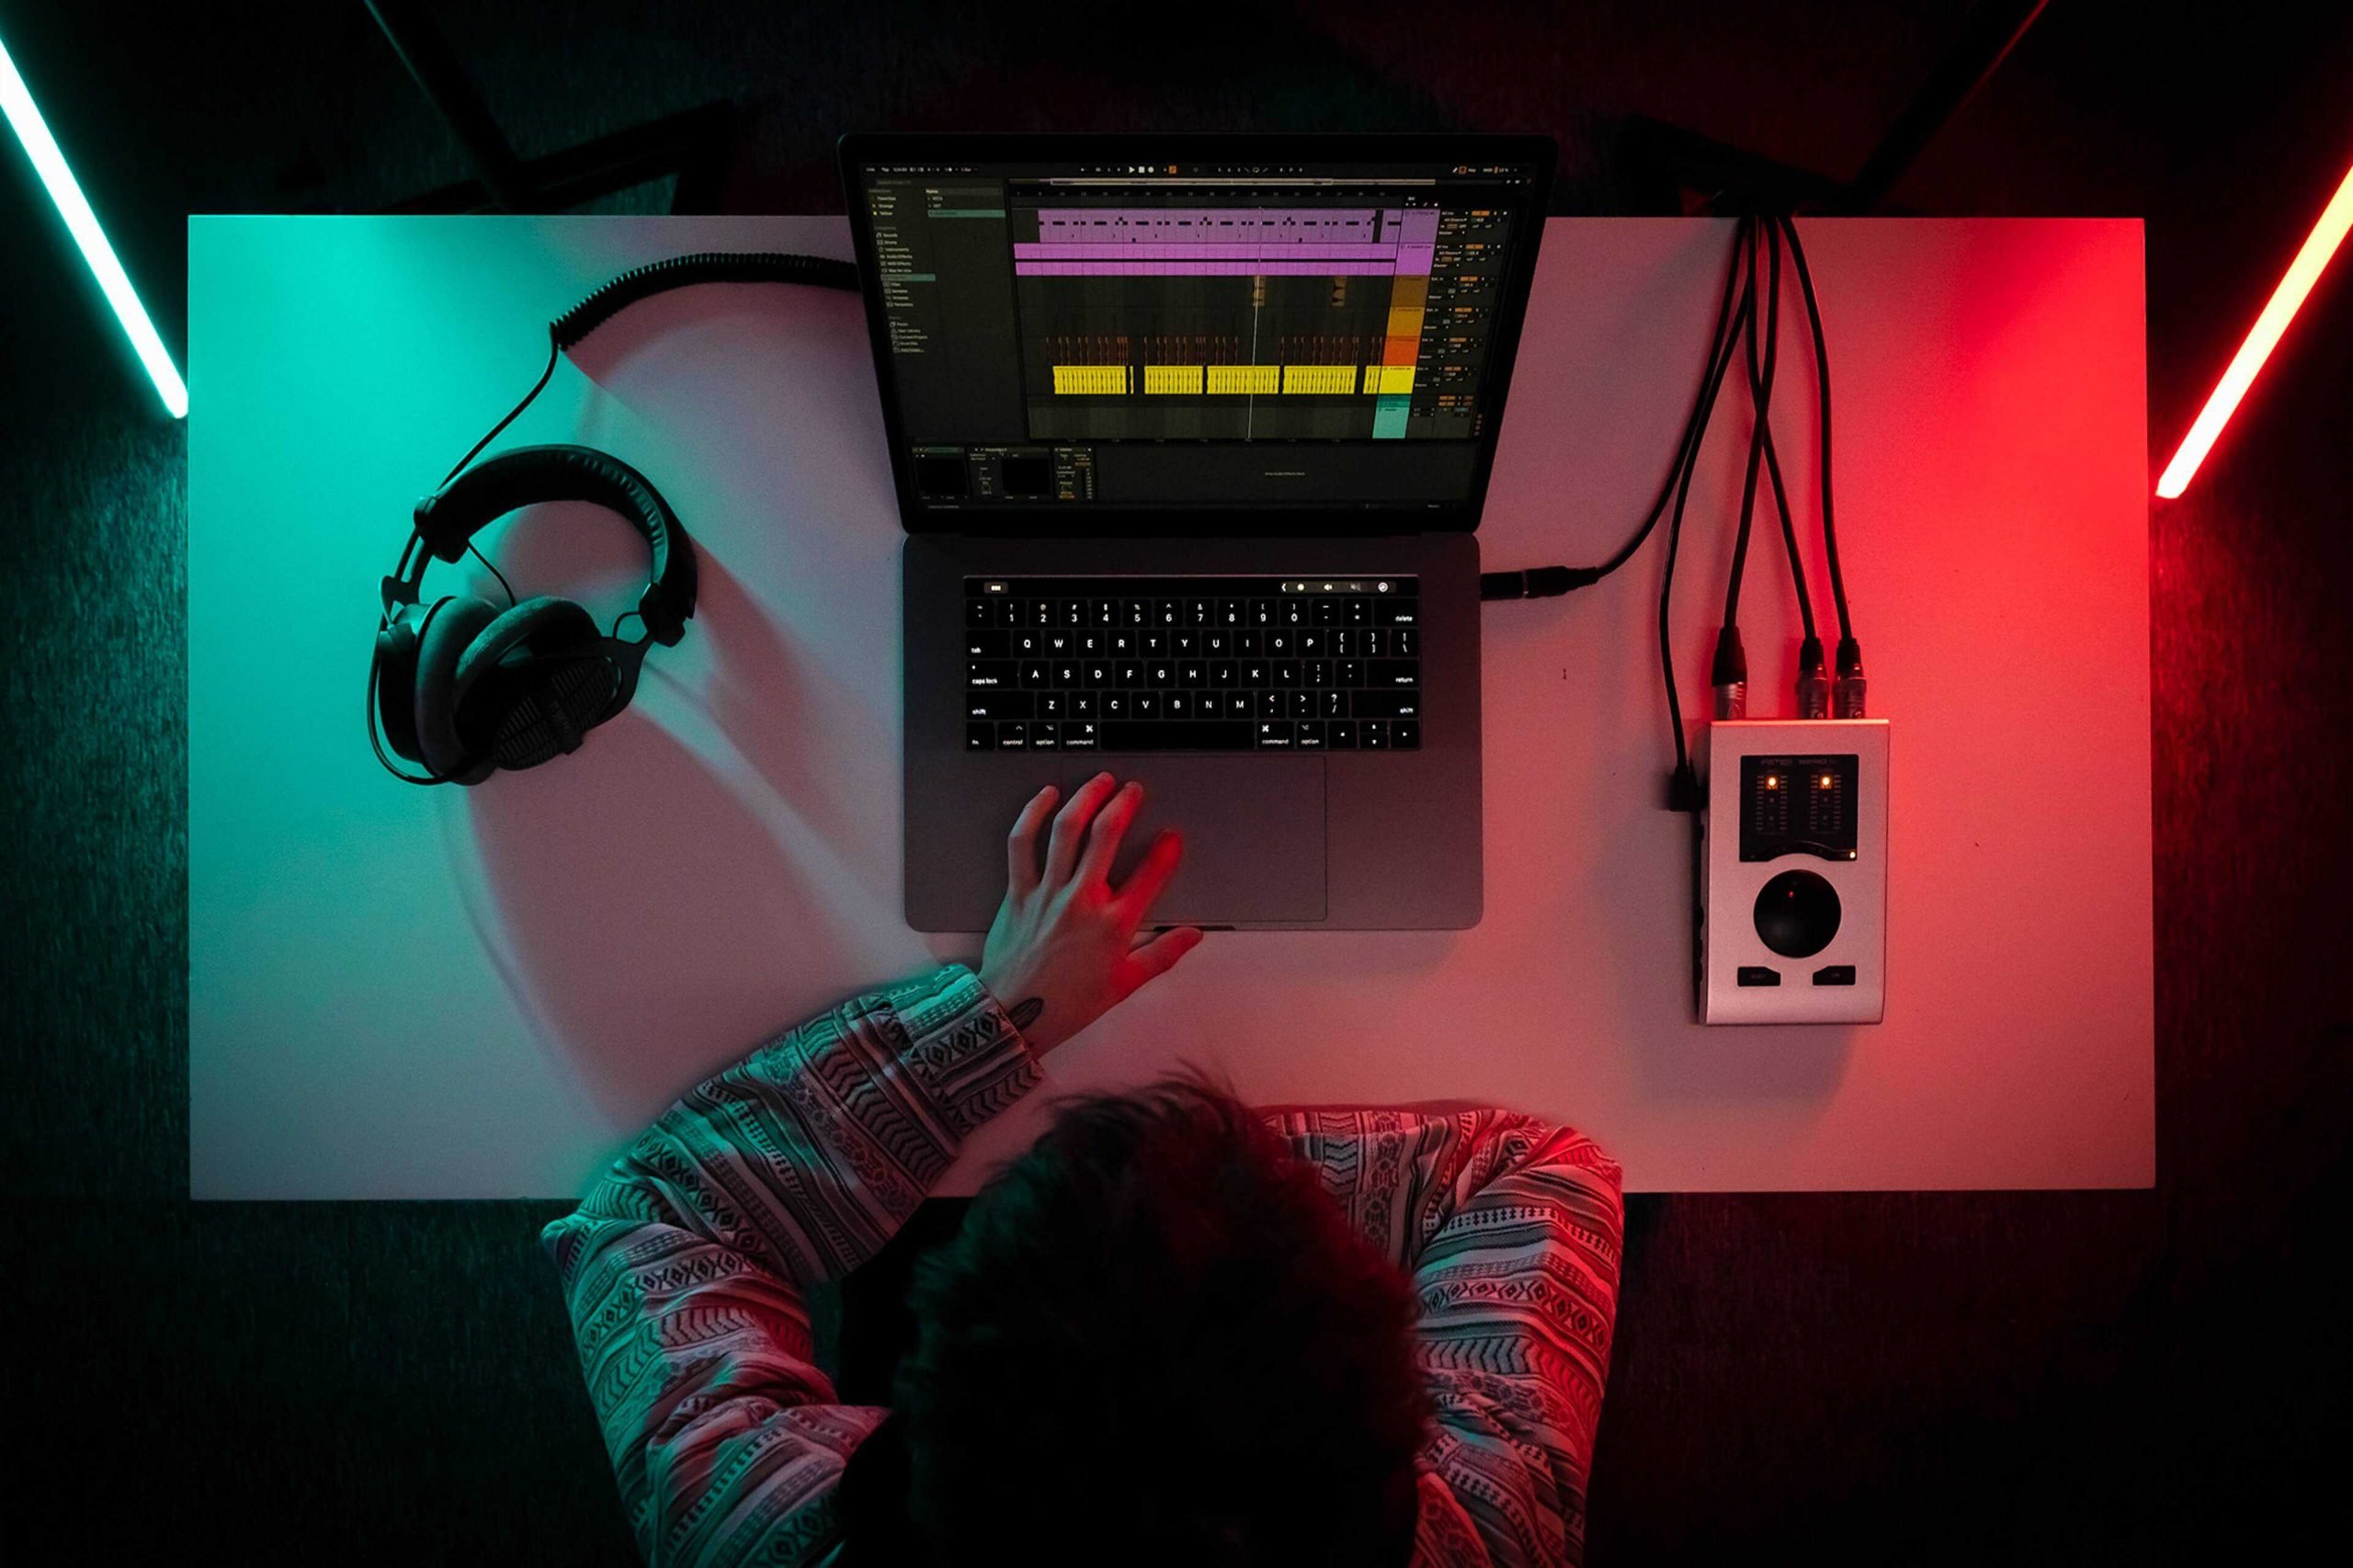 Ableton Live Suite 10 is now available for a free 90-day trial during COVID-19 outbreak